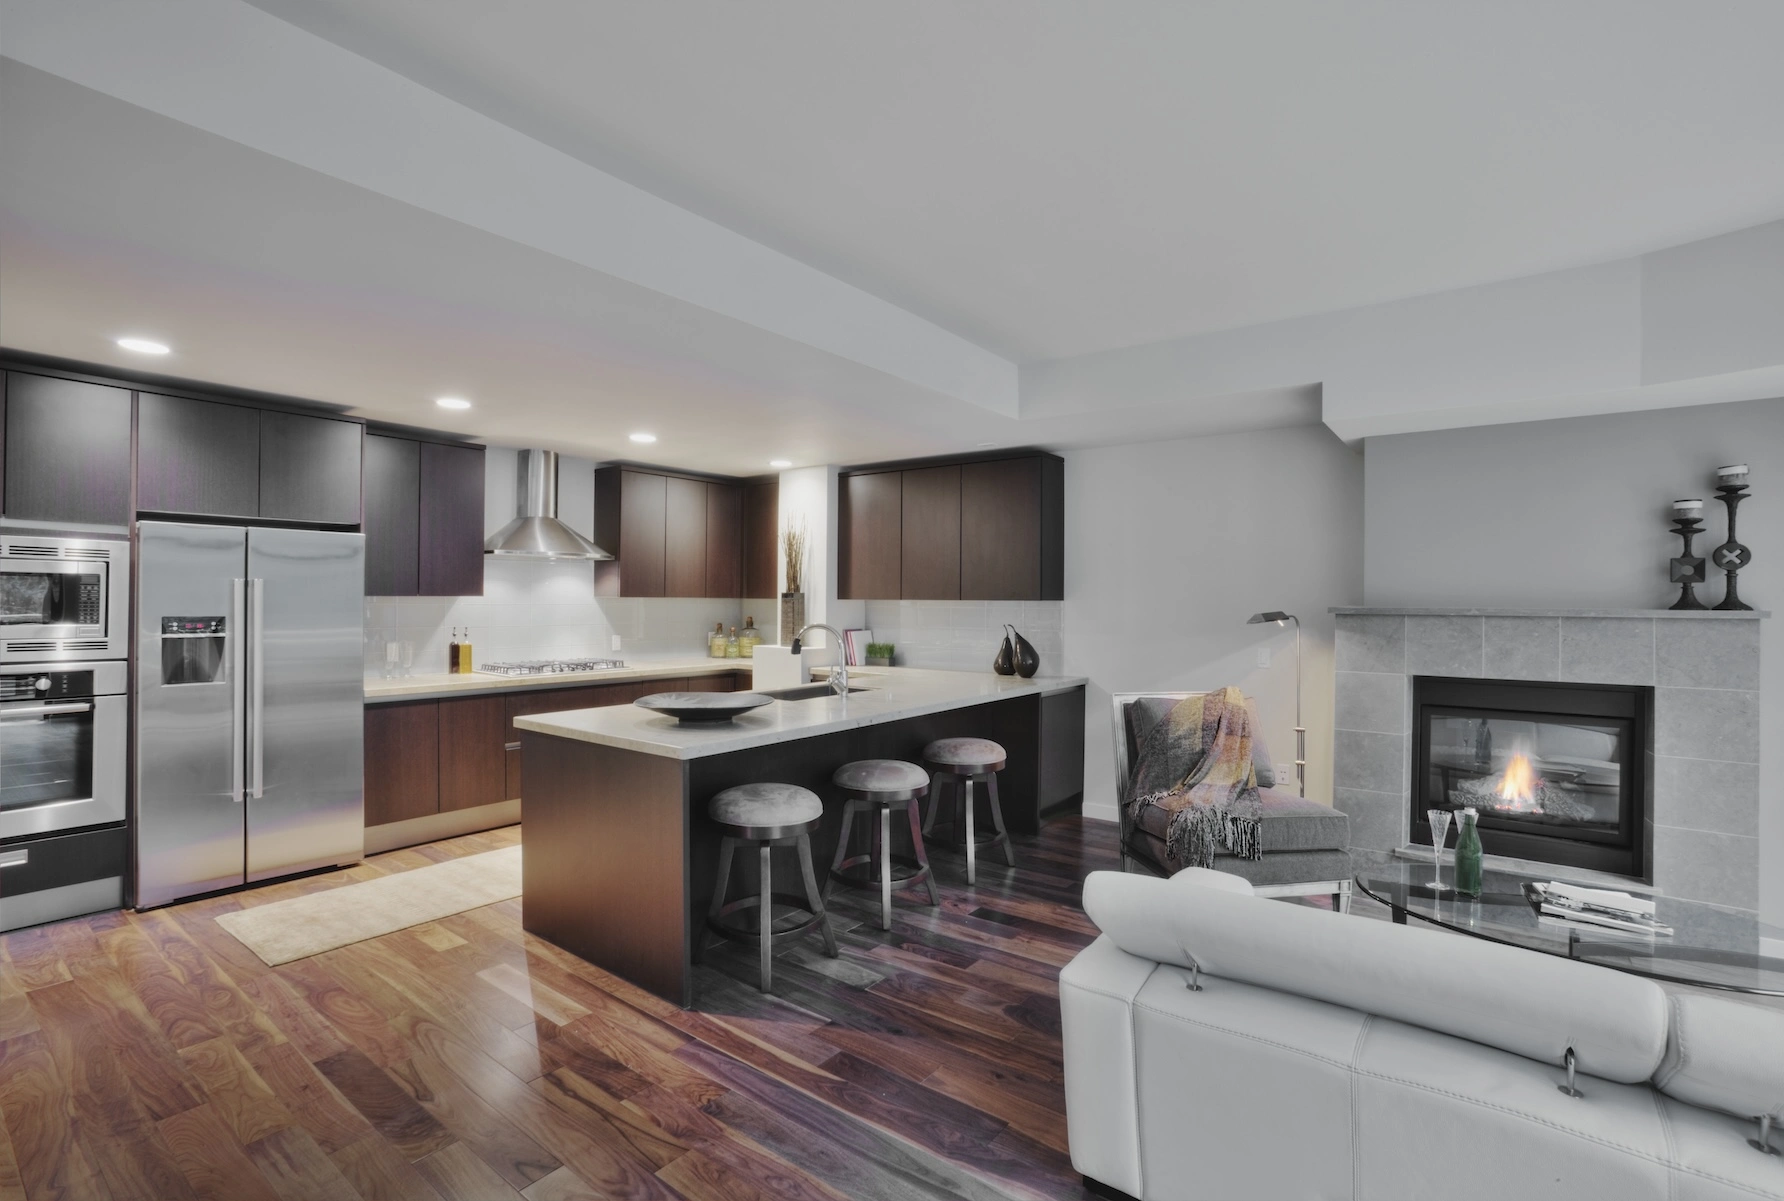  "Luxury Living, Simplified and The Benefits of Downsizing to a High-End Condo" - Discuss the advantages of downsizing to a luxury condo in Boulder.